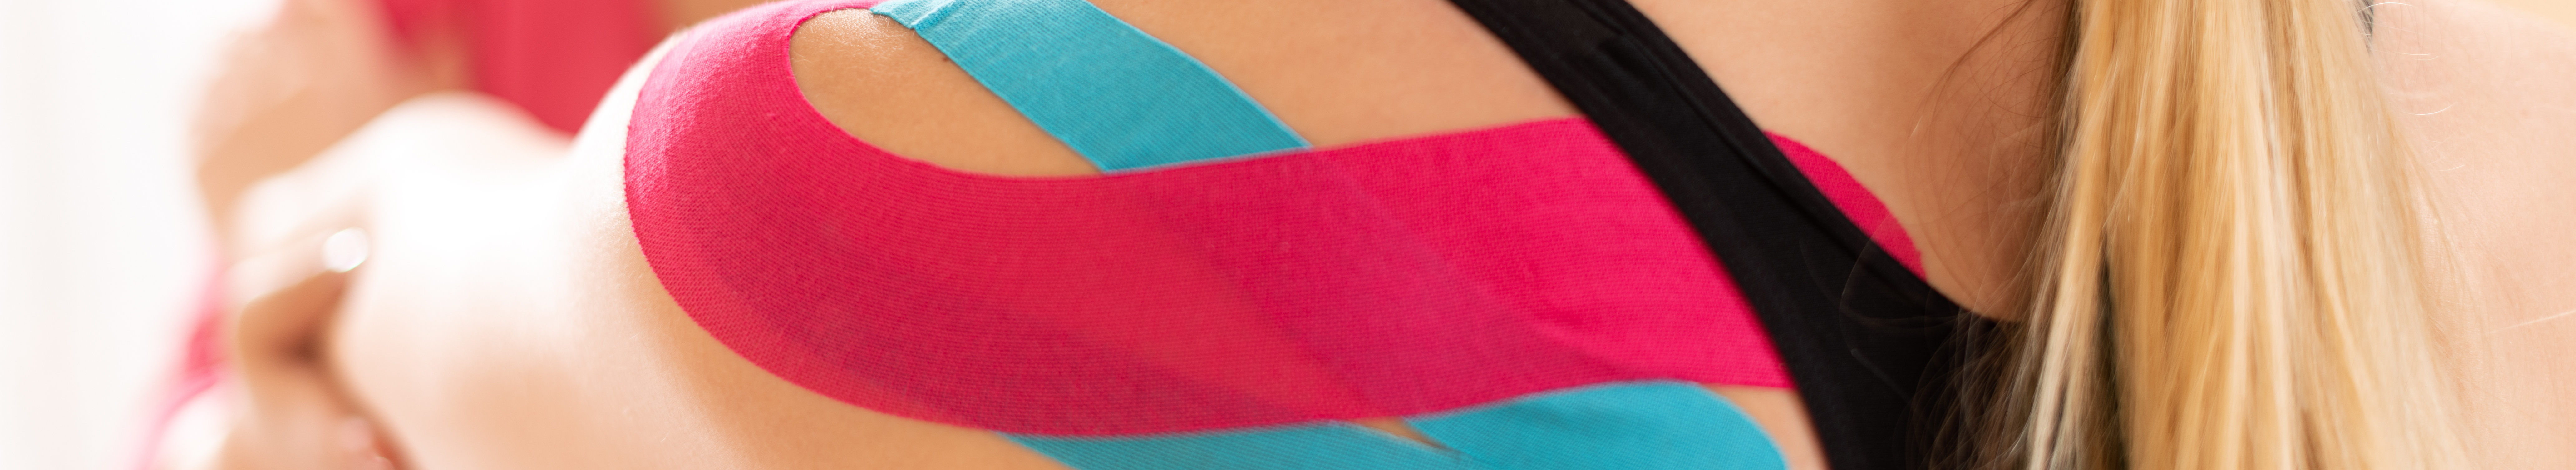 Woman having kinesiology tape applied to shoulder